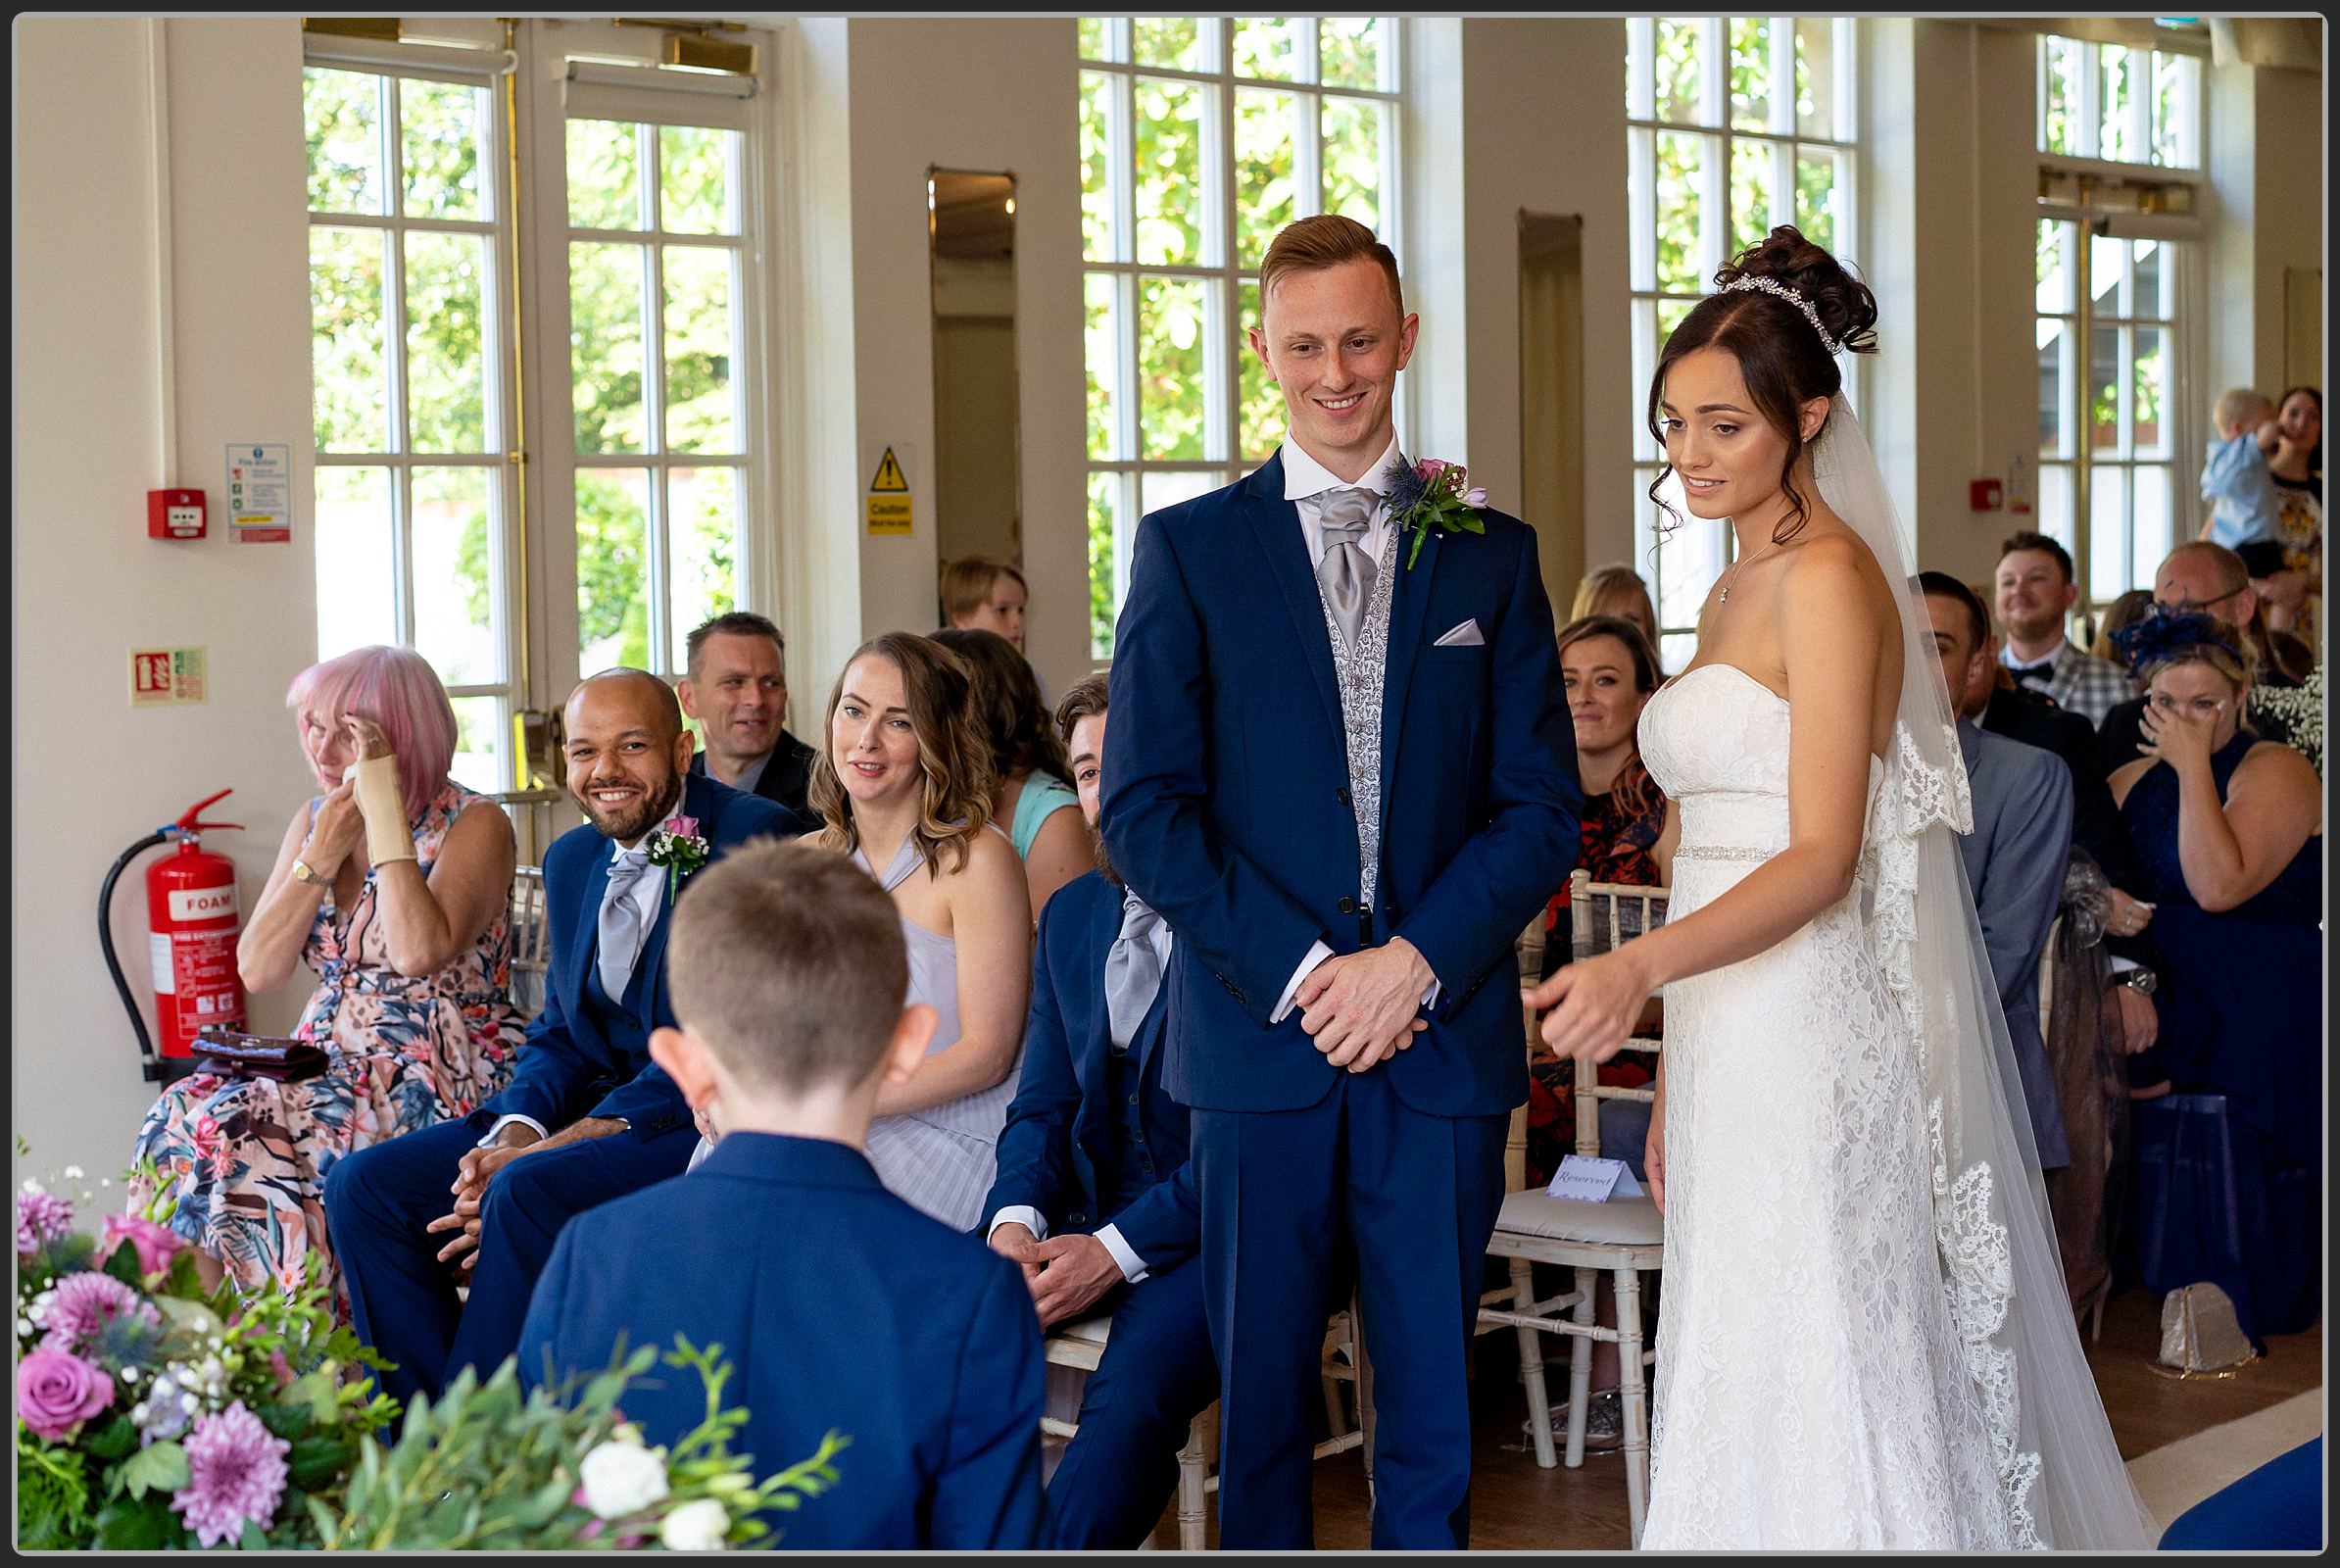 The Bride and Groom during the ceremony at Warwick House